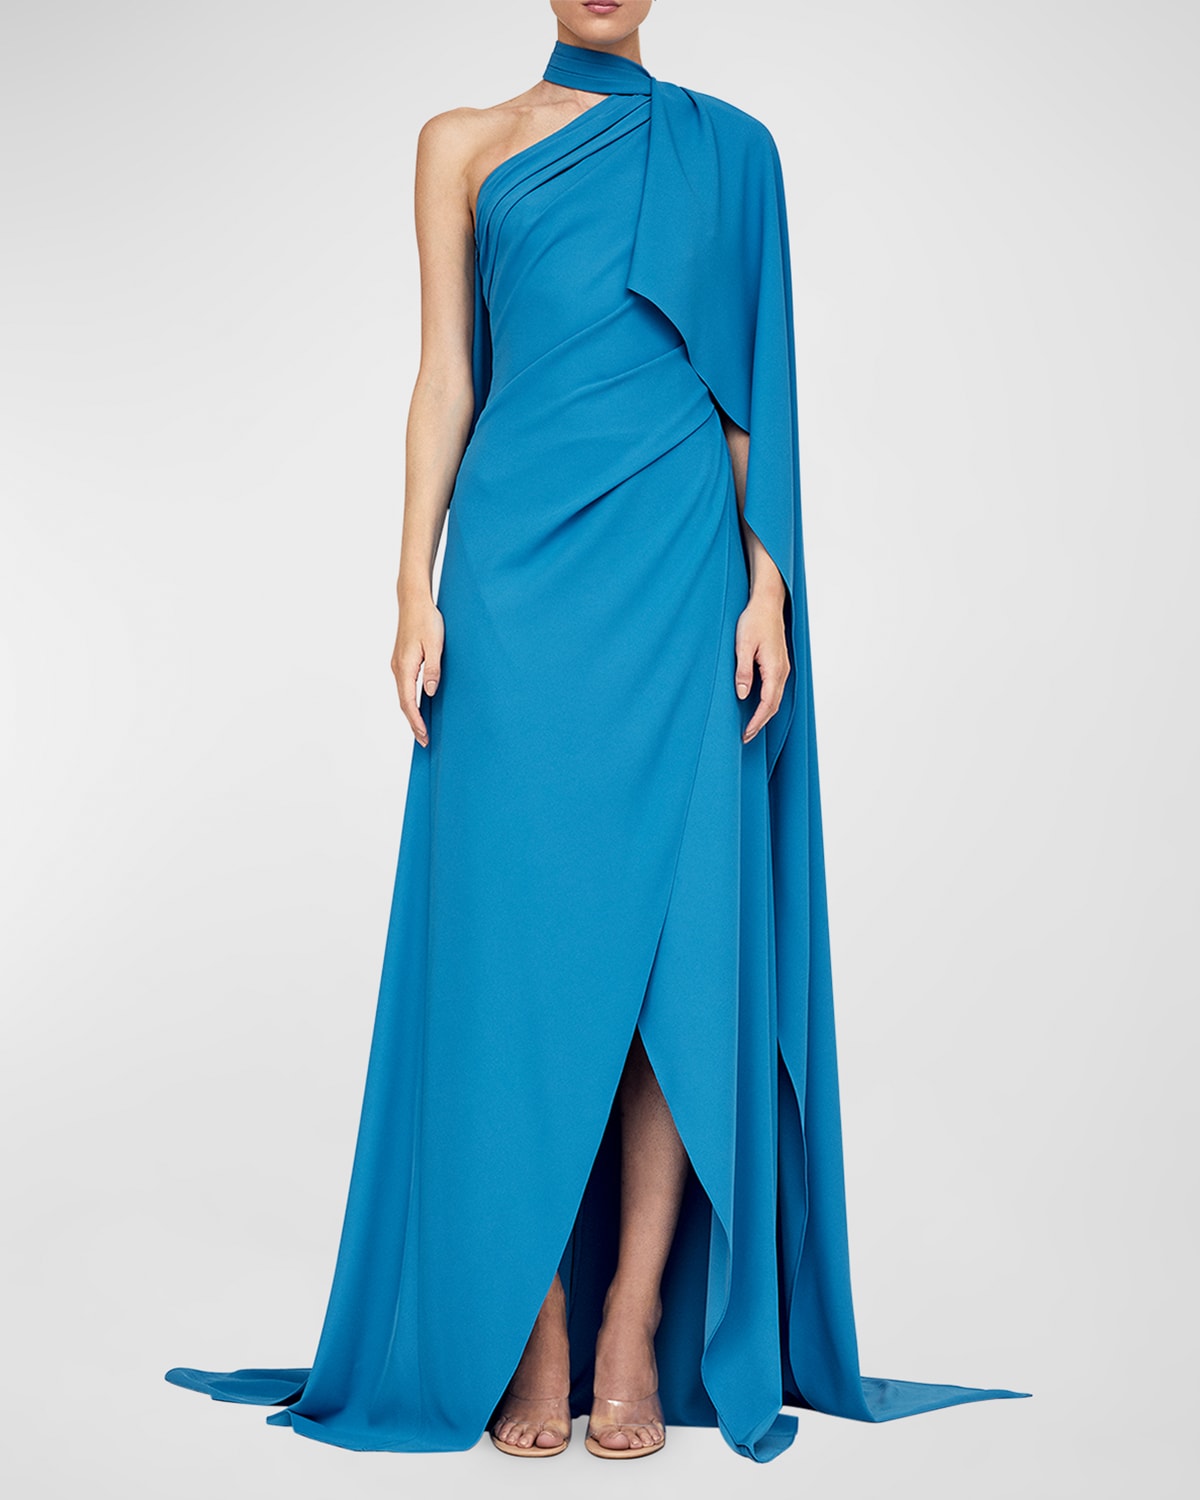 ATELIER PRABAL GURUNG CLAIRE DRAPED CAPE GOWN